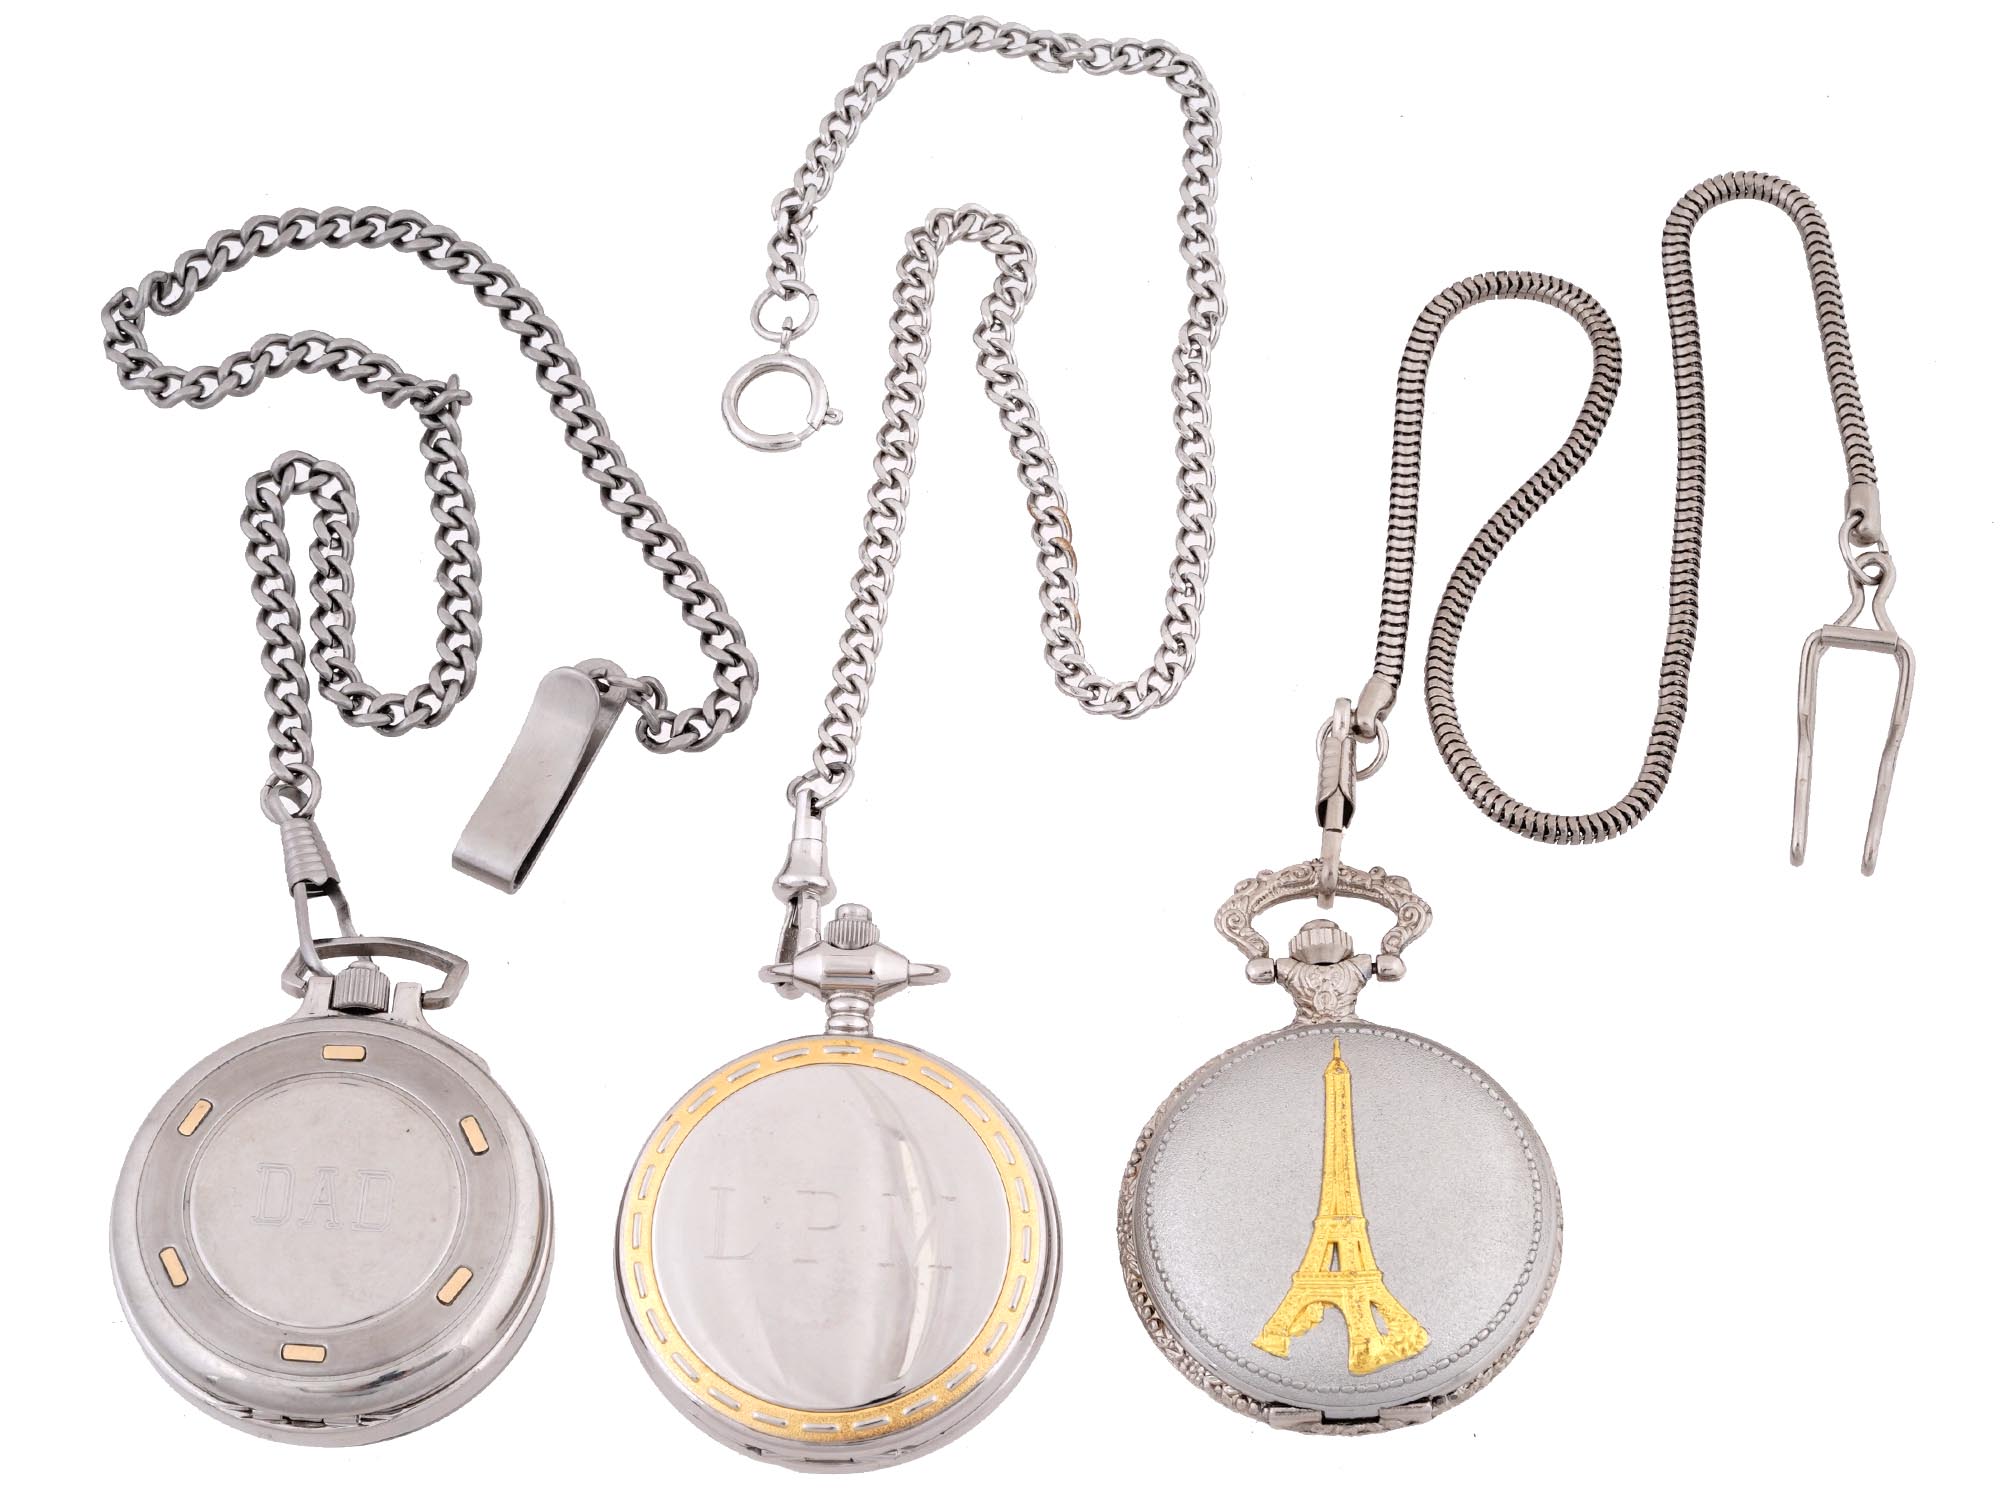 VINTAGE COLIBRI ZHONGFA POCKET WATCHES WITH CHAINS PIC-1